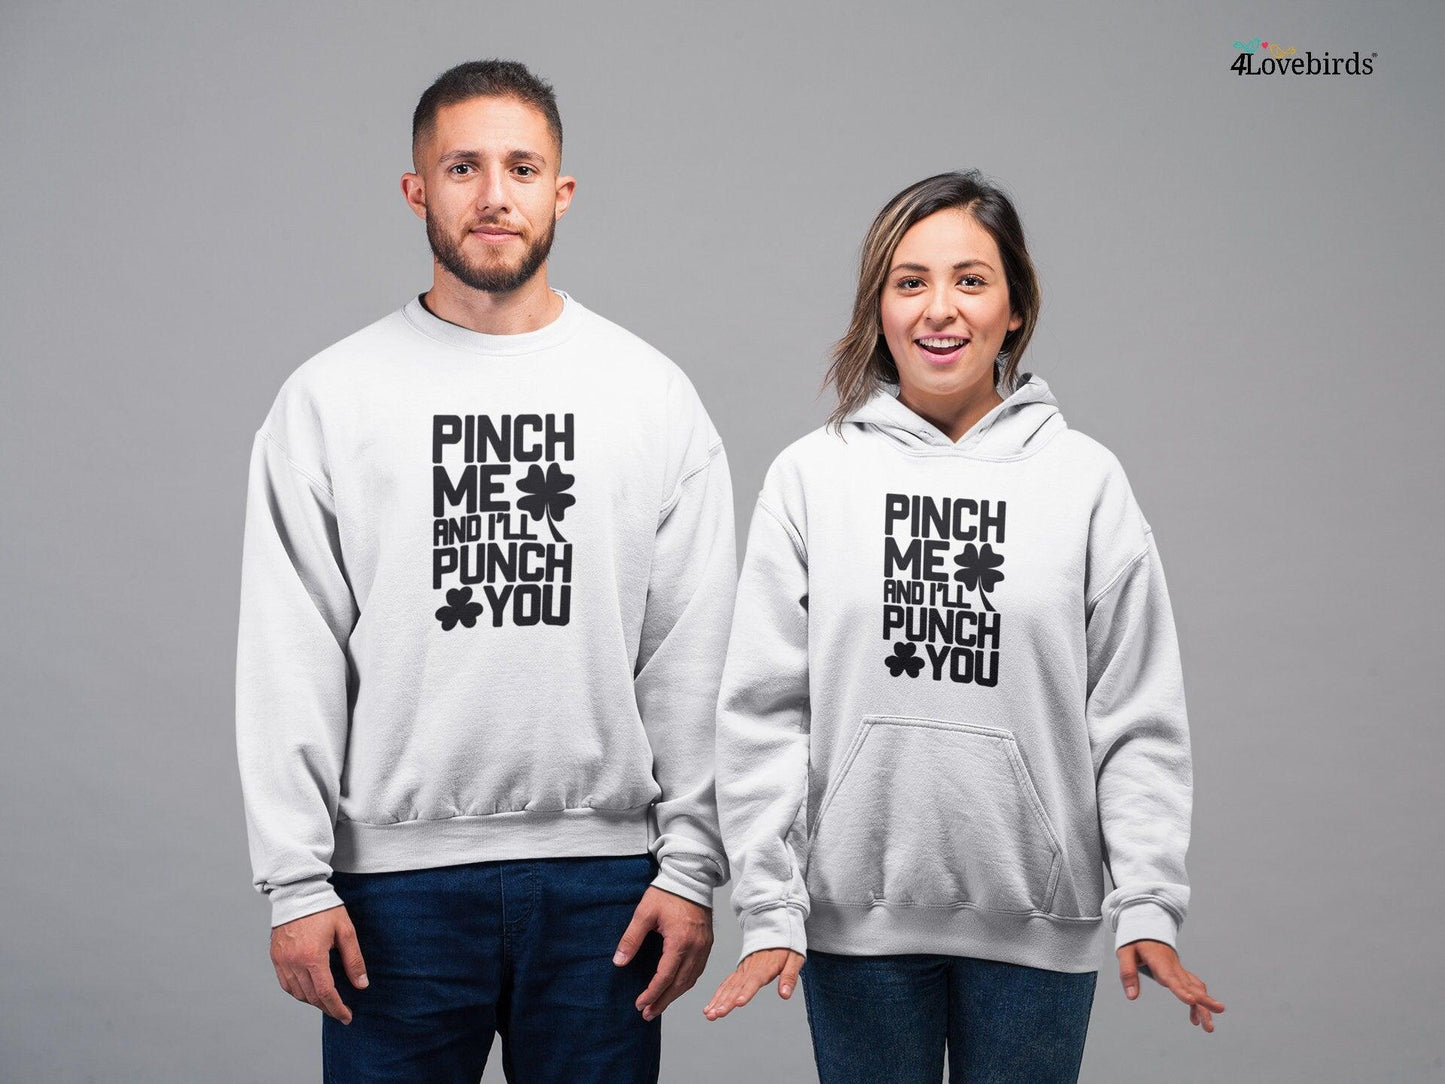 Pinch me and I'll you punch you Hoodie, Lovers matching T-shirt, Gift for Couples, Valentine Sweatshirt, Boyfriend and Girlfriend Longsleeve - 4Lovebirds